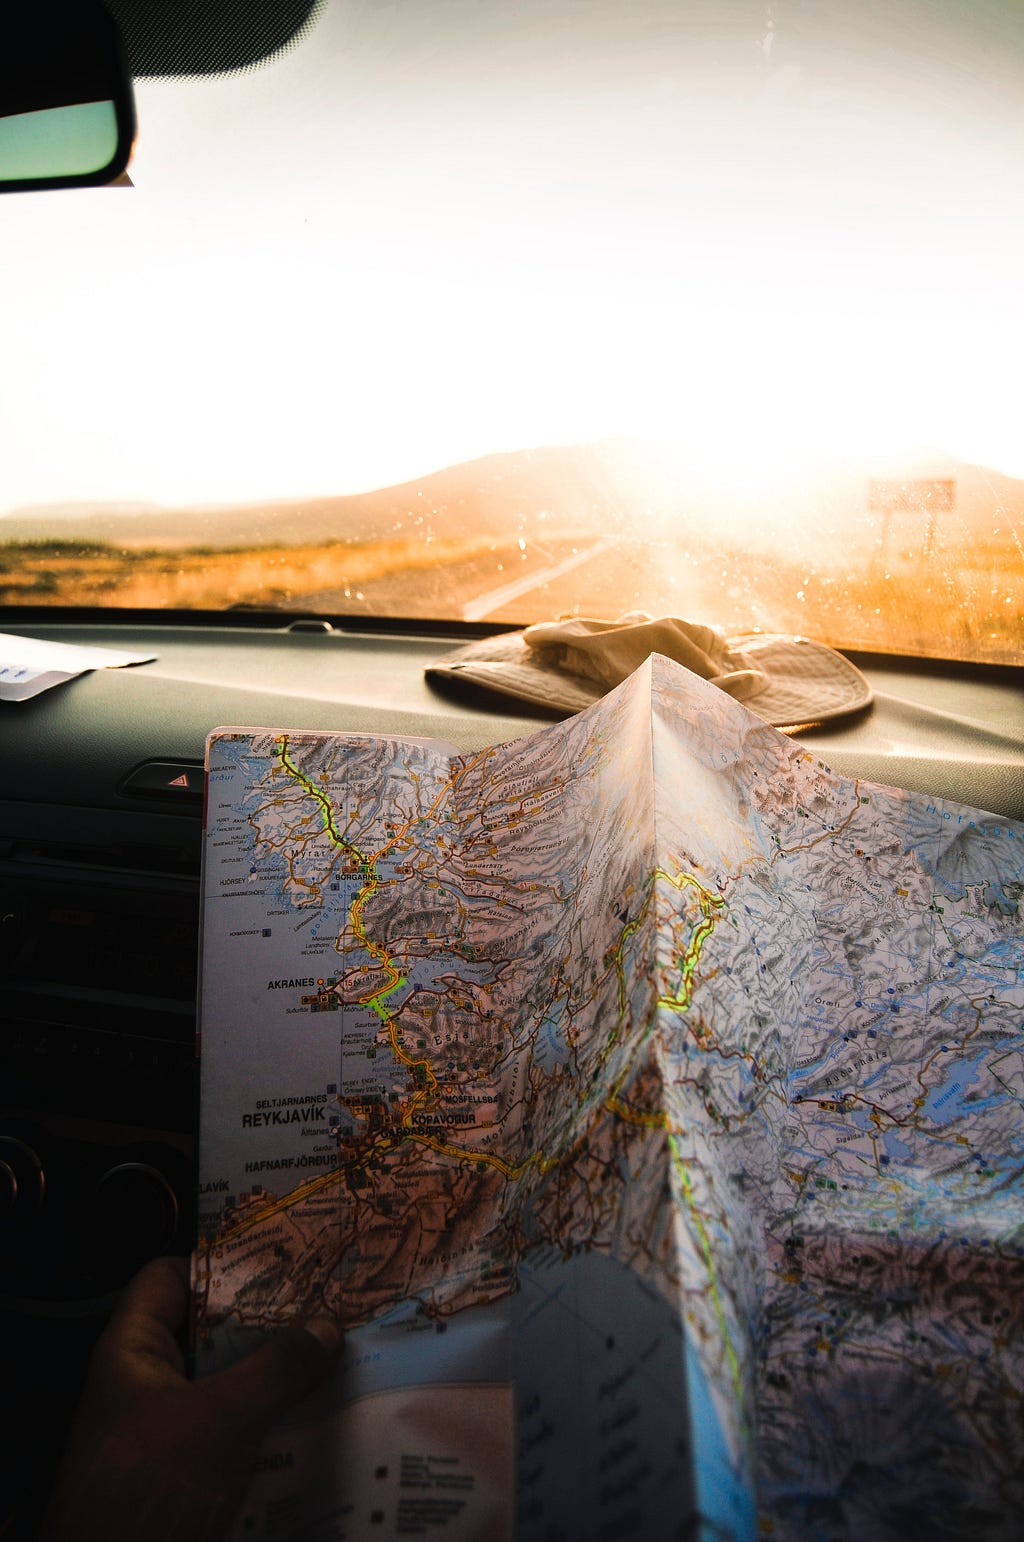 A map rests against a car dashboard as a sunset is visible through the windshield. Photo by Julentto Photography on Unsplash